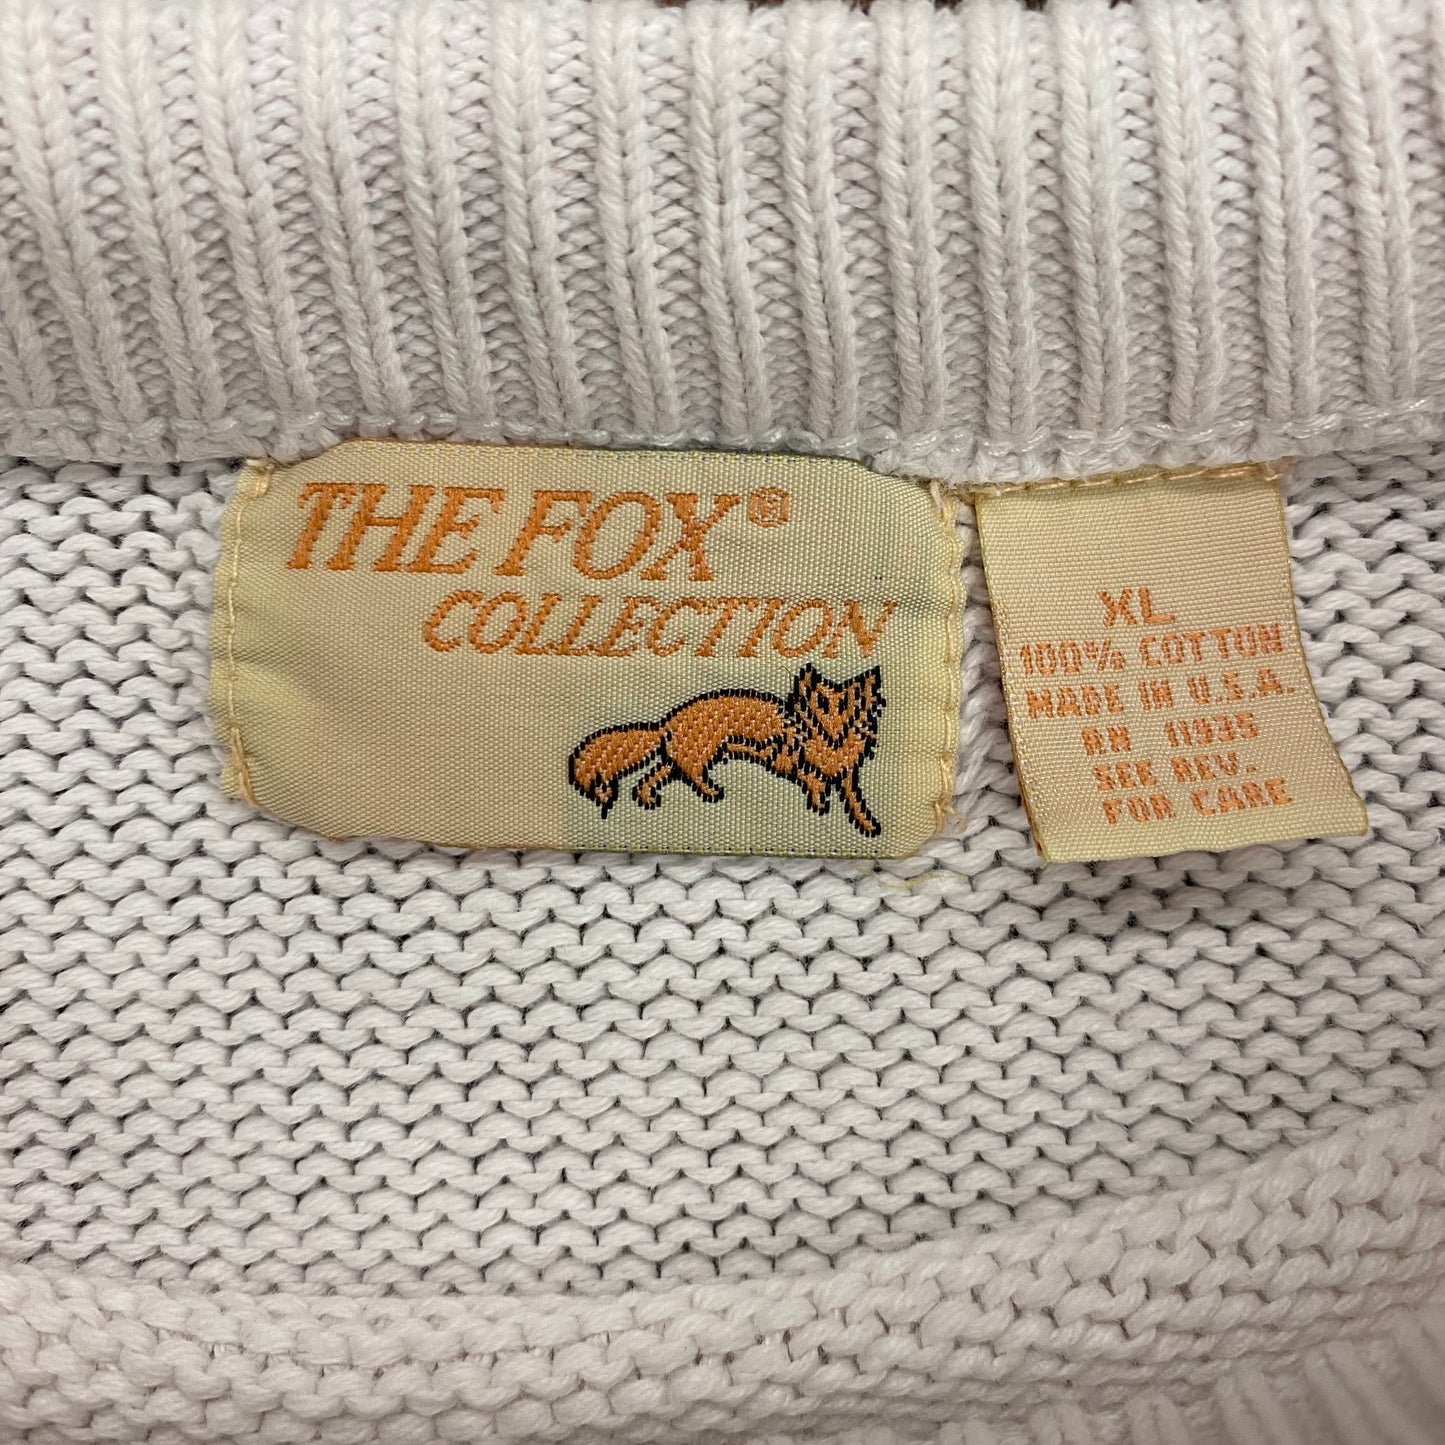 1980s The Fox Collection White Knit Sweater - Size XL (Fits Large)